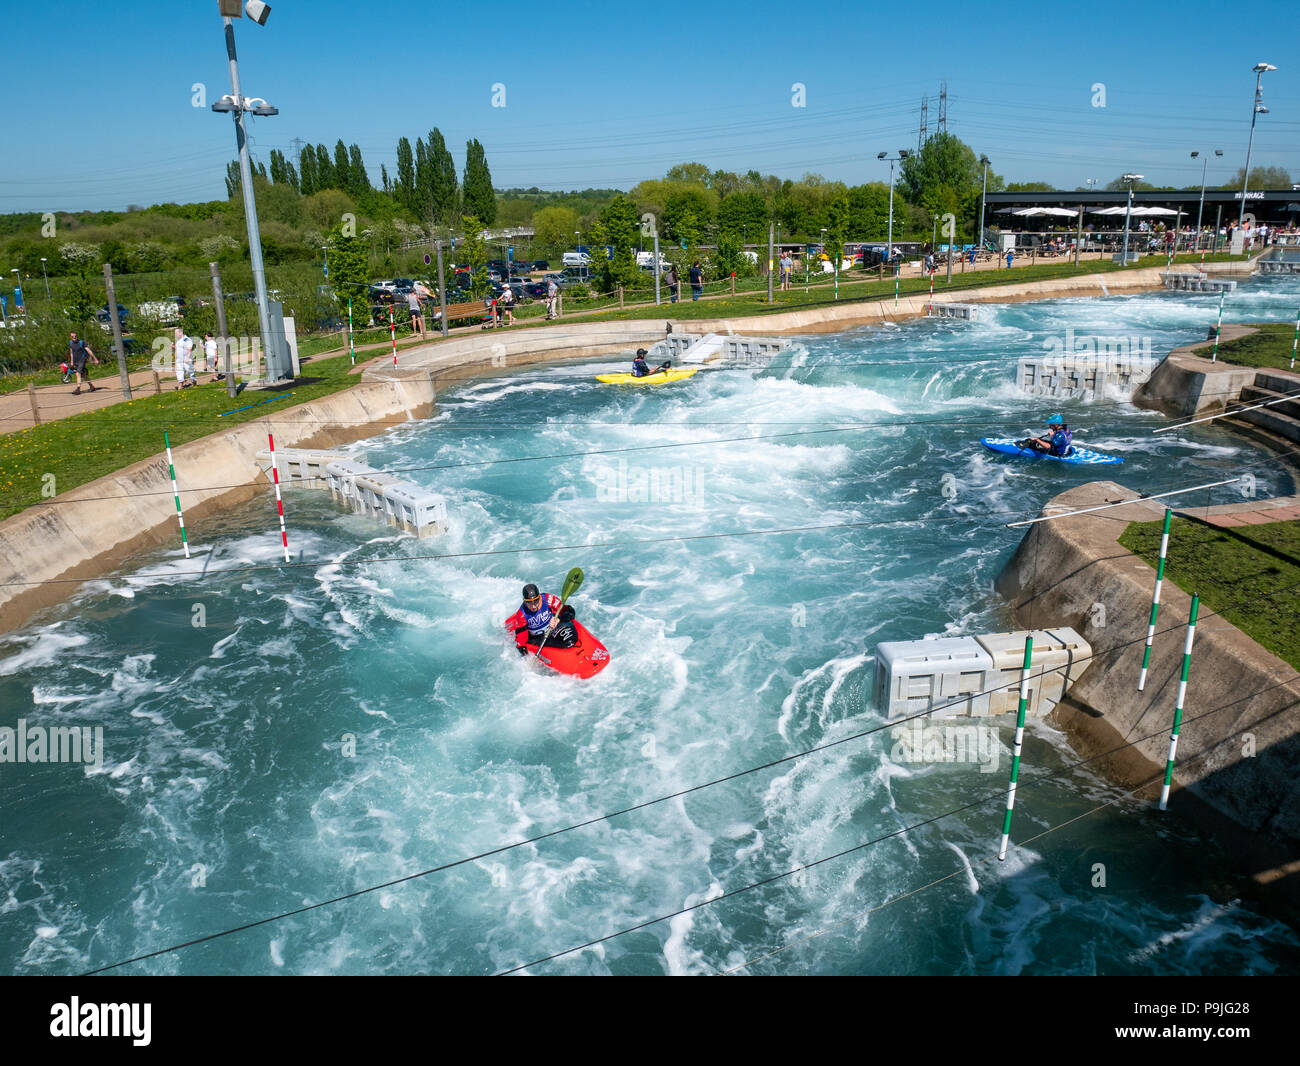 White water rafting à la Lee Valley White Water Centre, London, UK Banque D'Images